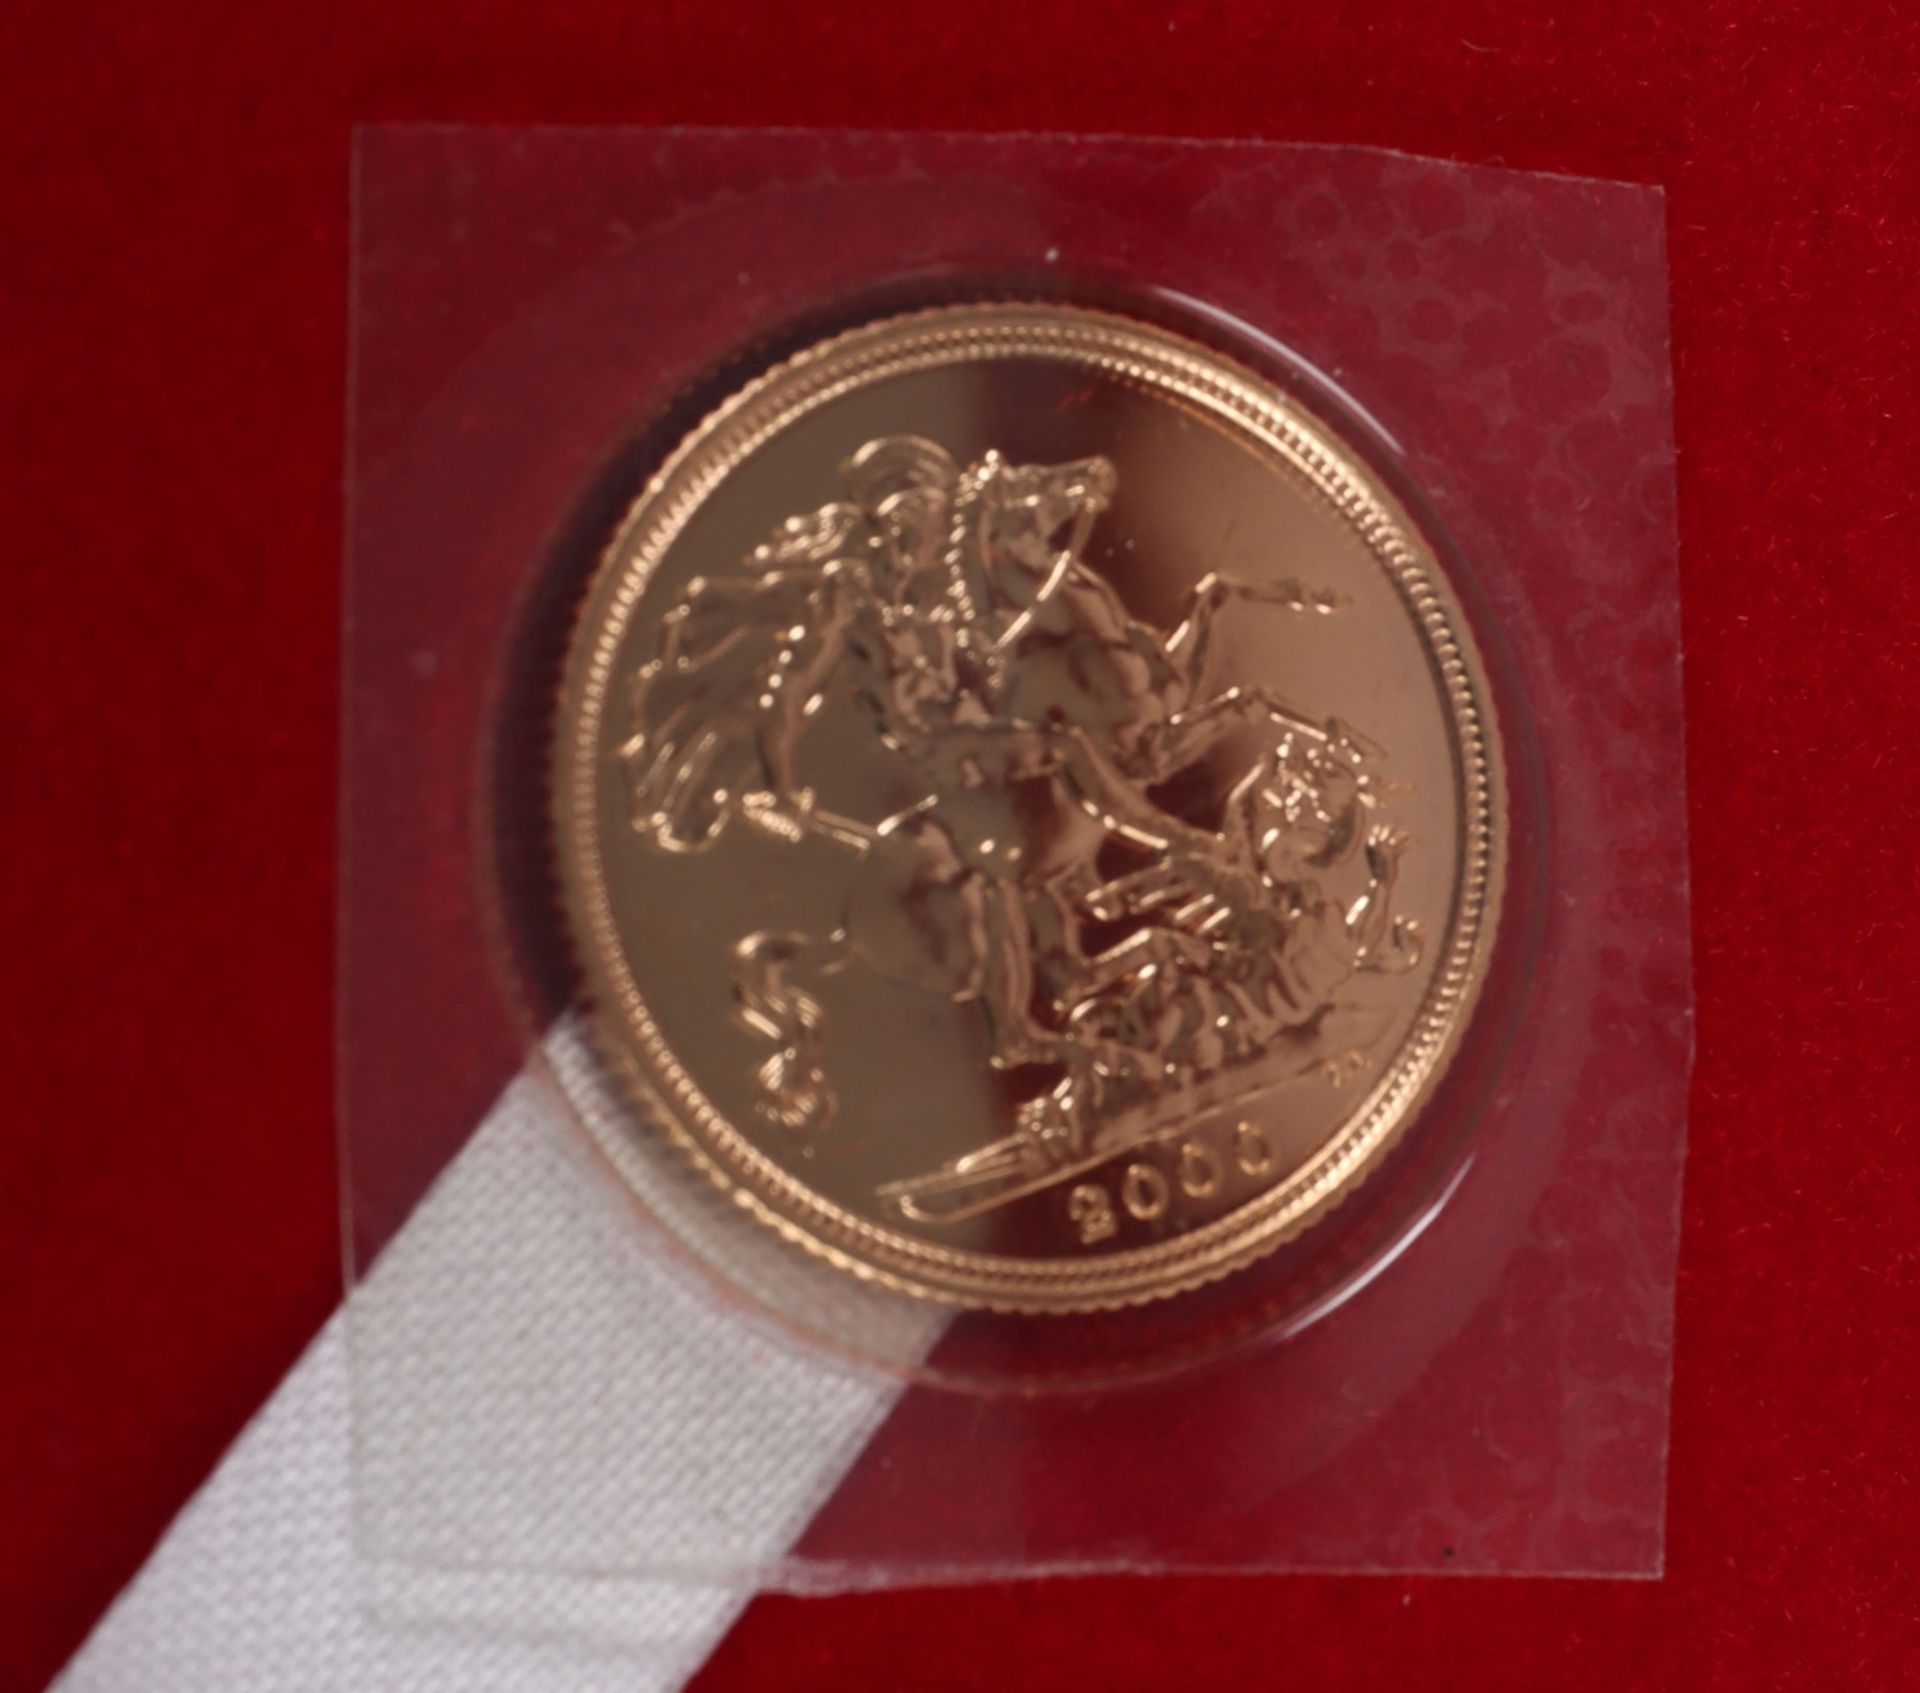 2000 Sovereign - Image 3 of 3